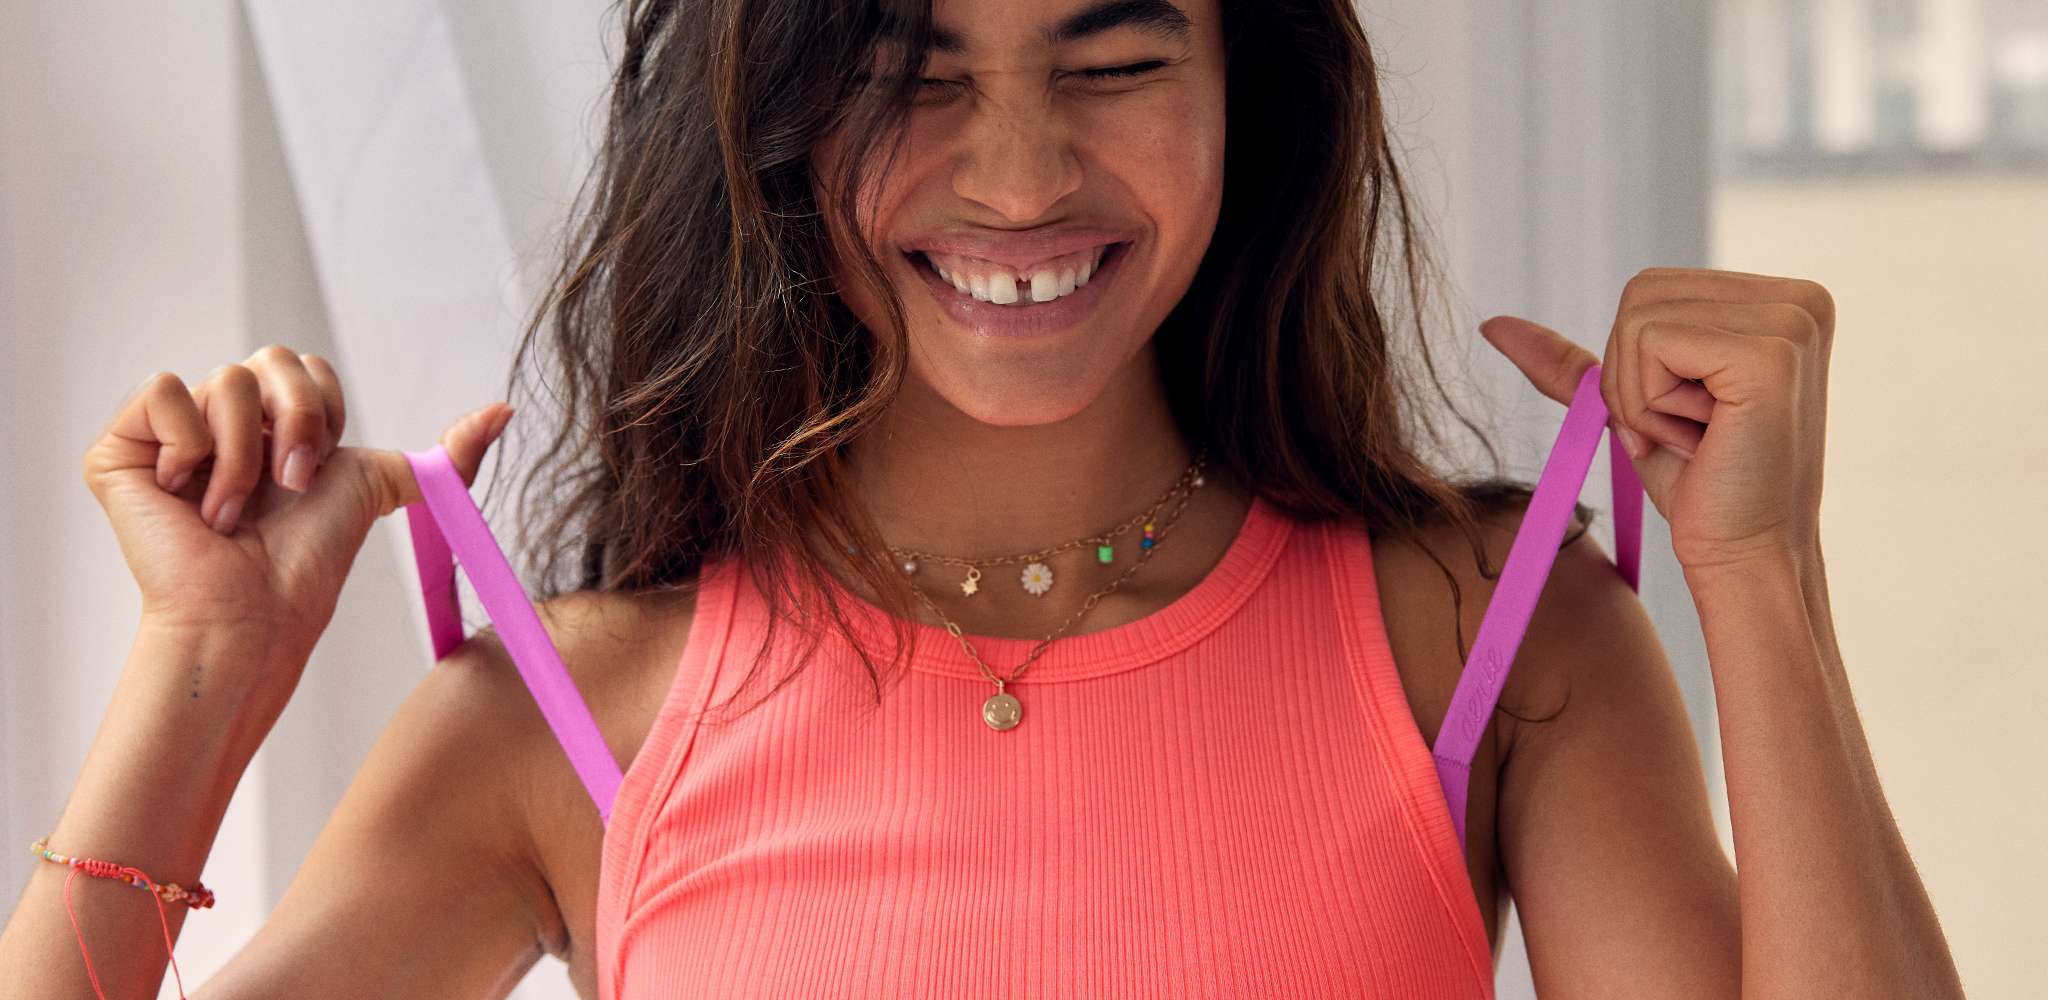 woman smiling wearing tank top and pulling bra straps 